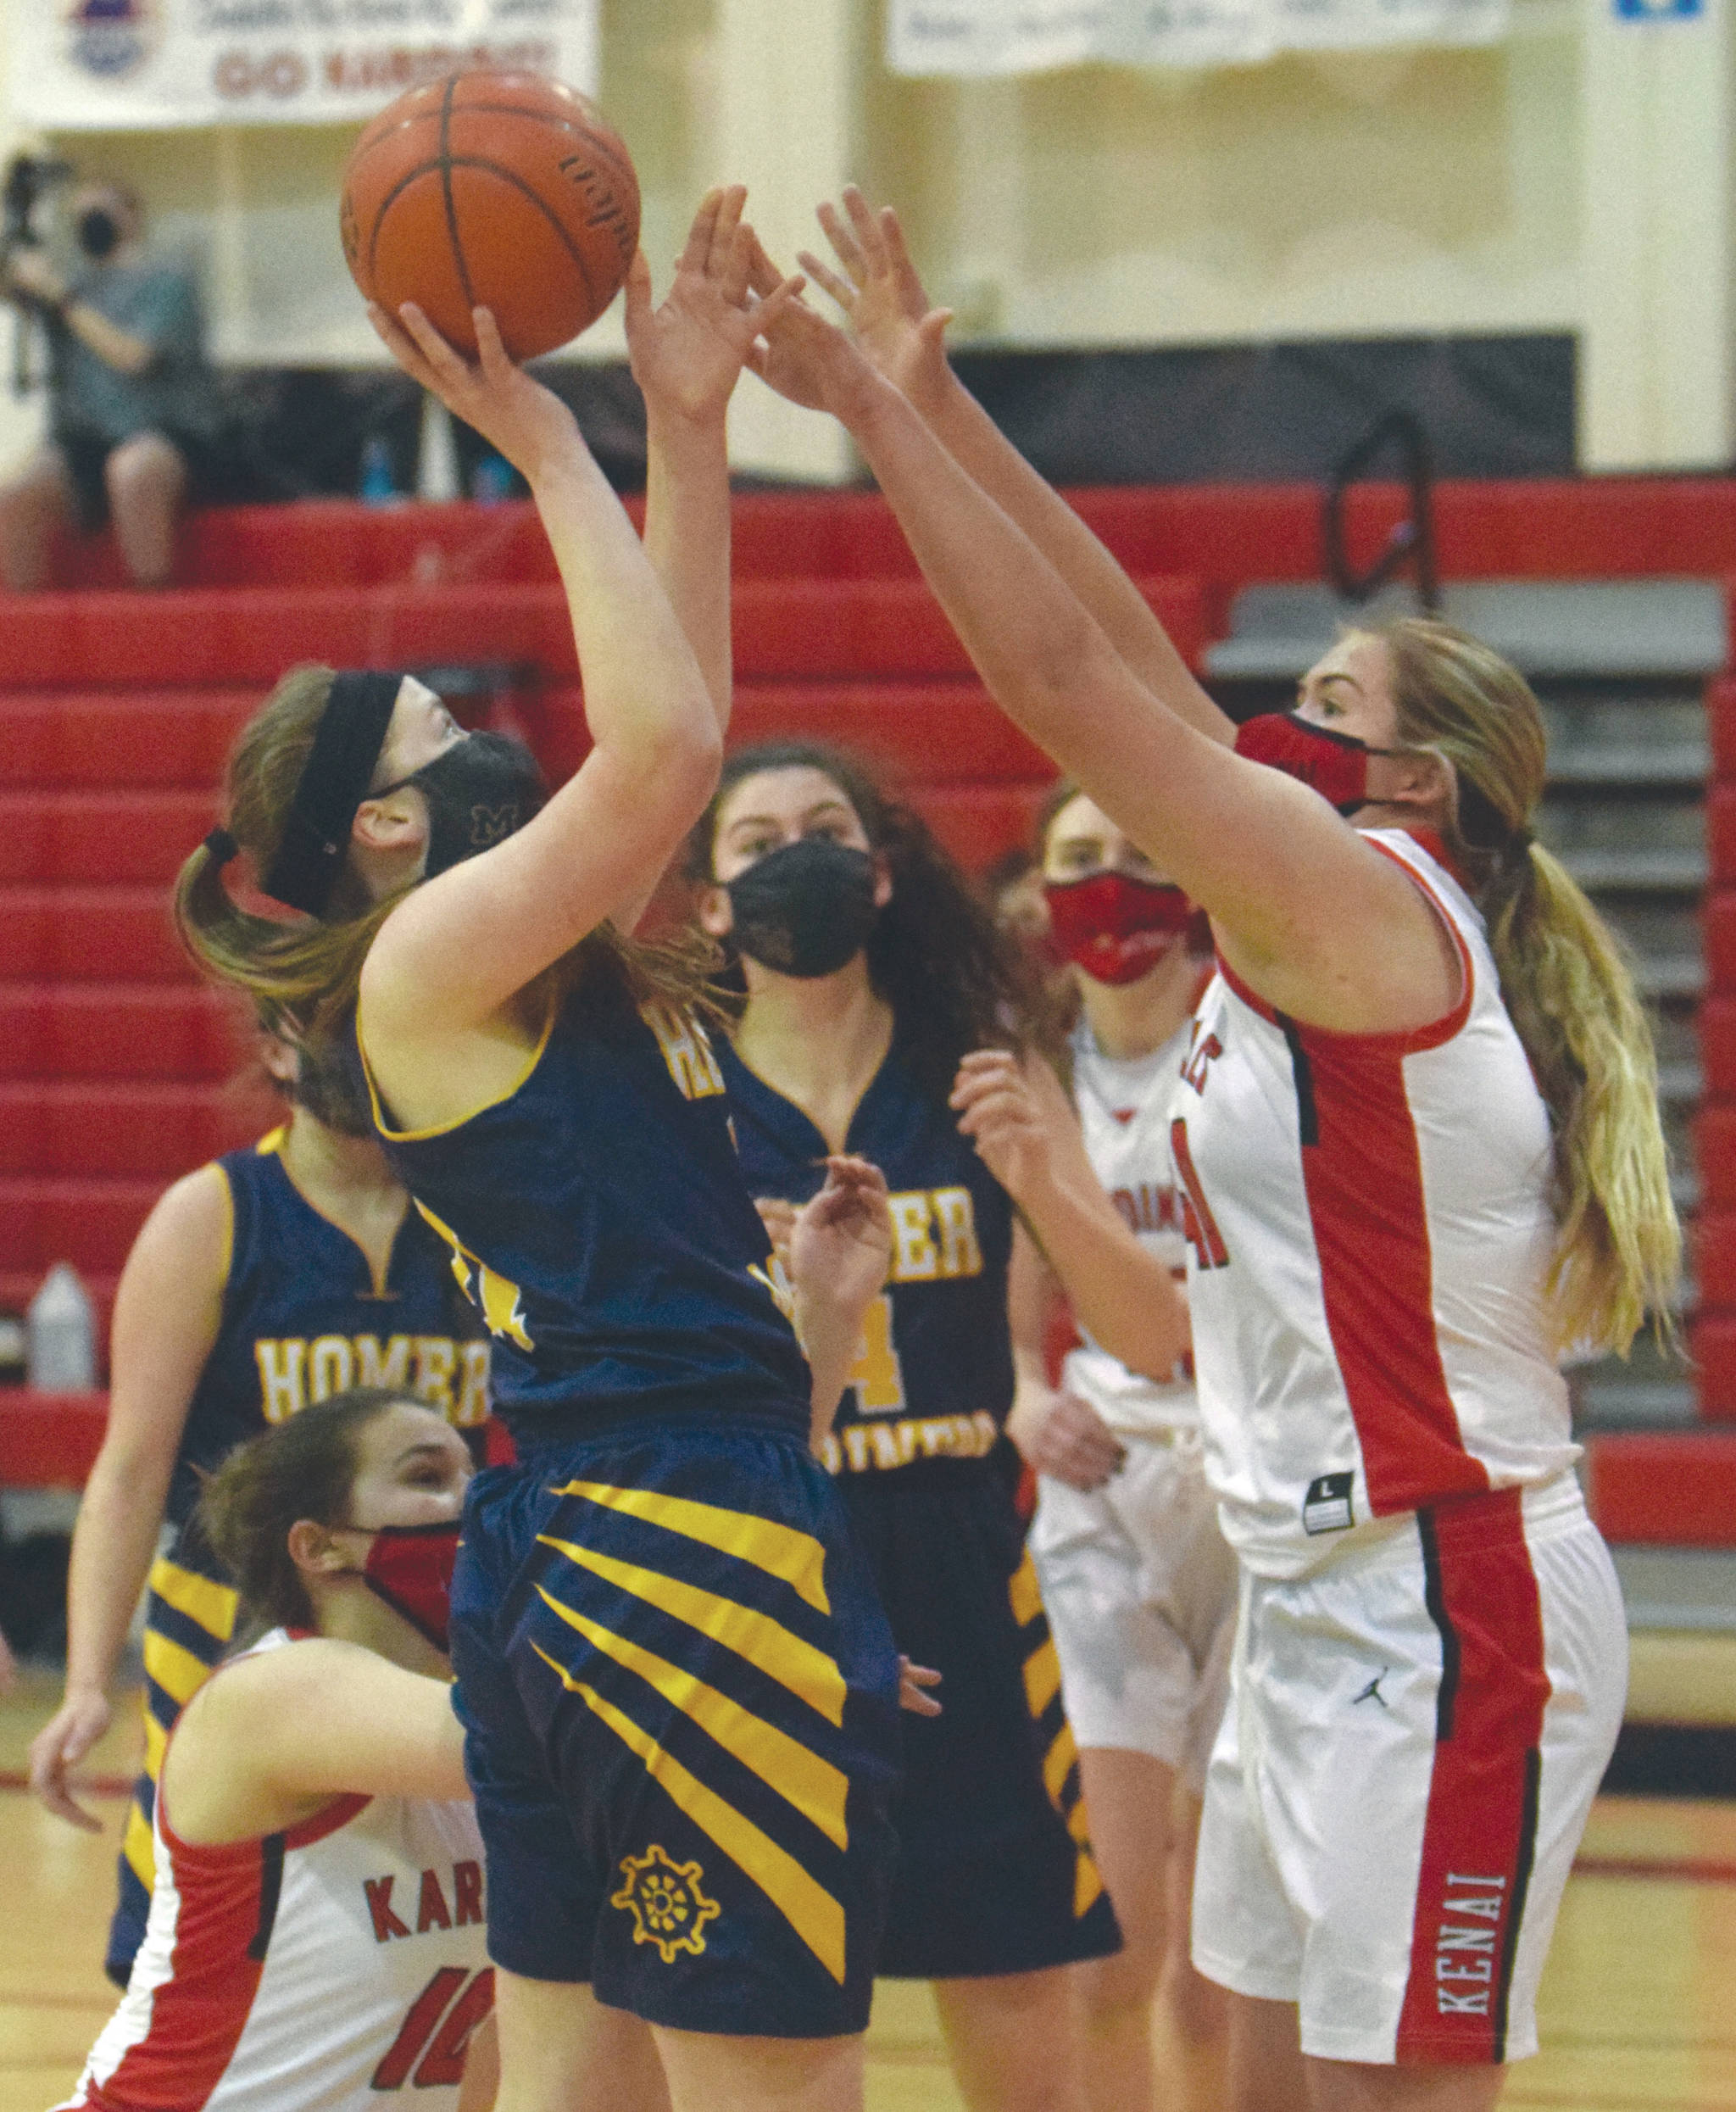 Homer’s Sophie Ellison goes up for a shot against Kenai Central’s Emma Beck on Thursday, March 4, 2021, at Kenai Central High School in Kenai, Alaska. (Photo by Jeff Helminiak/Peninsula Clarion)